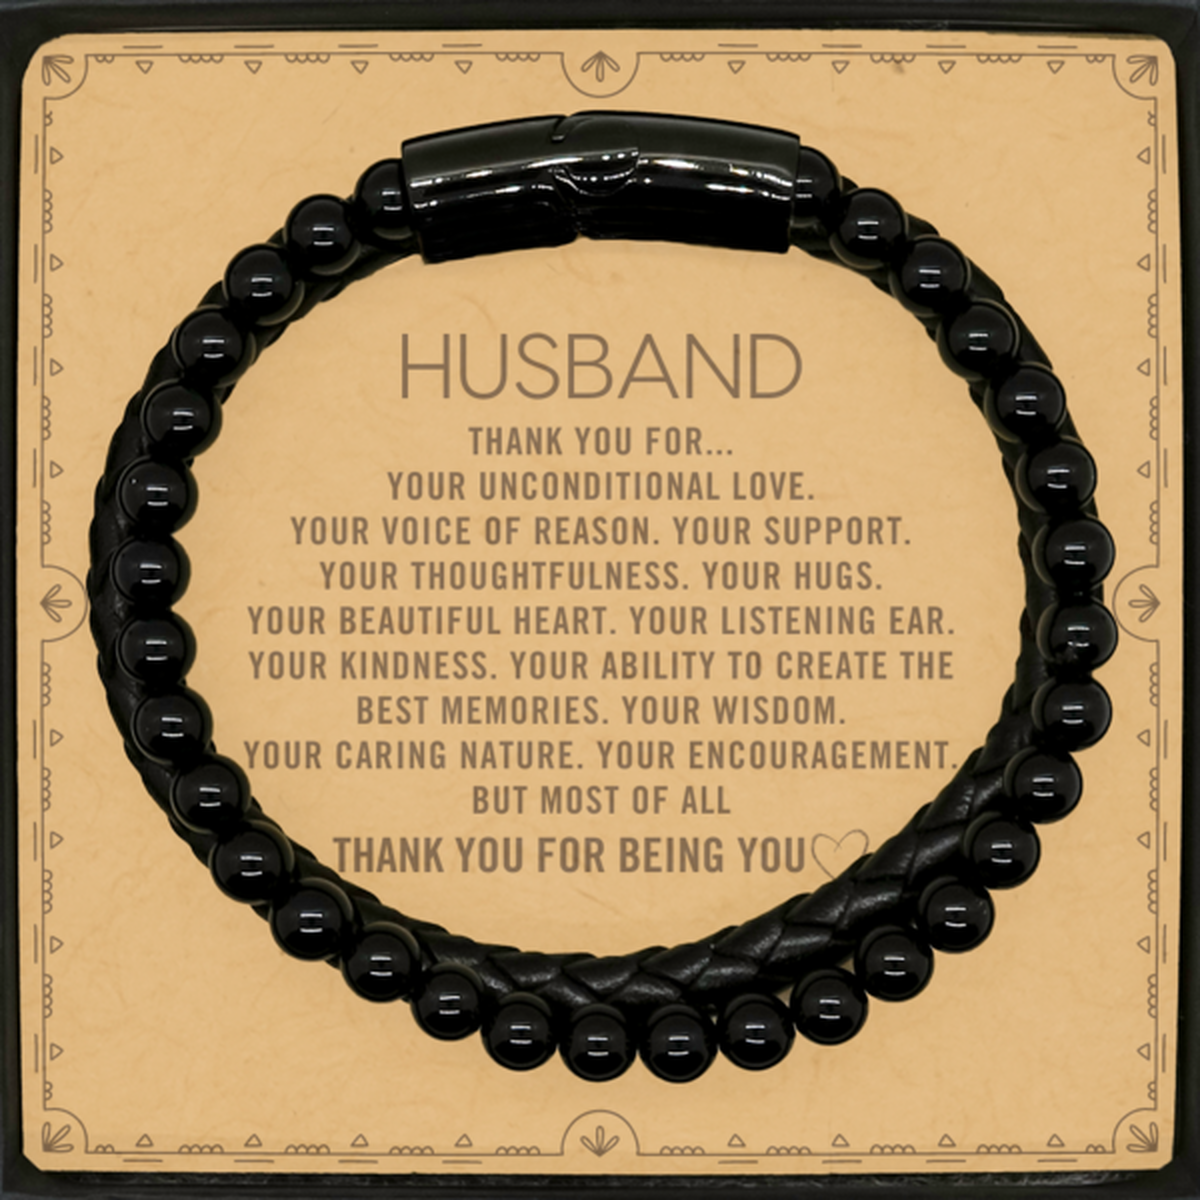 Husband Stone Leather Bracelets Custom, Message Card Gifts For Husband Christmas Graduation Birthday Gifts for Men Women Husband Thank you for Your unconditional love